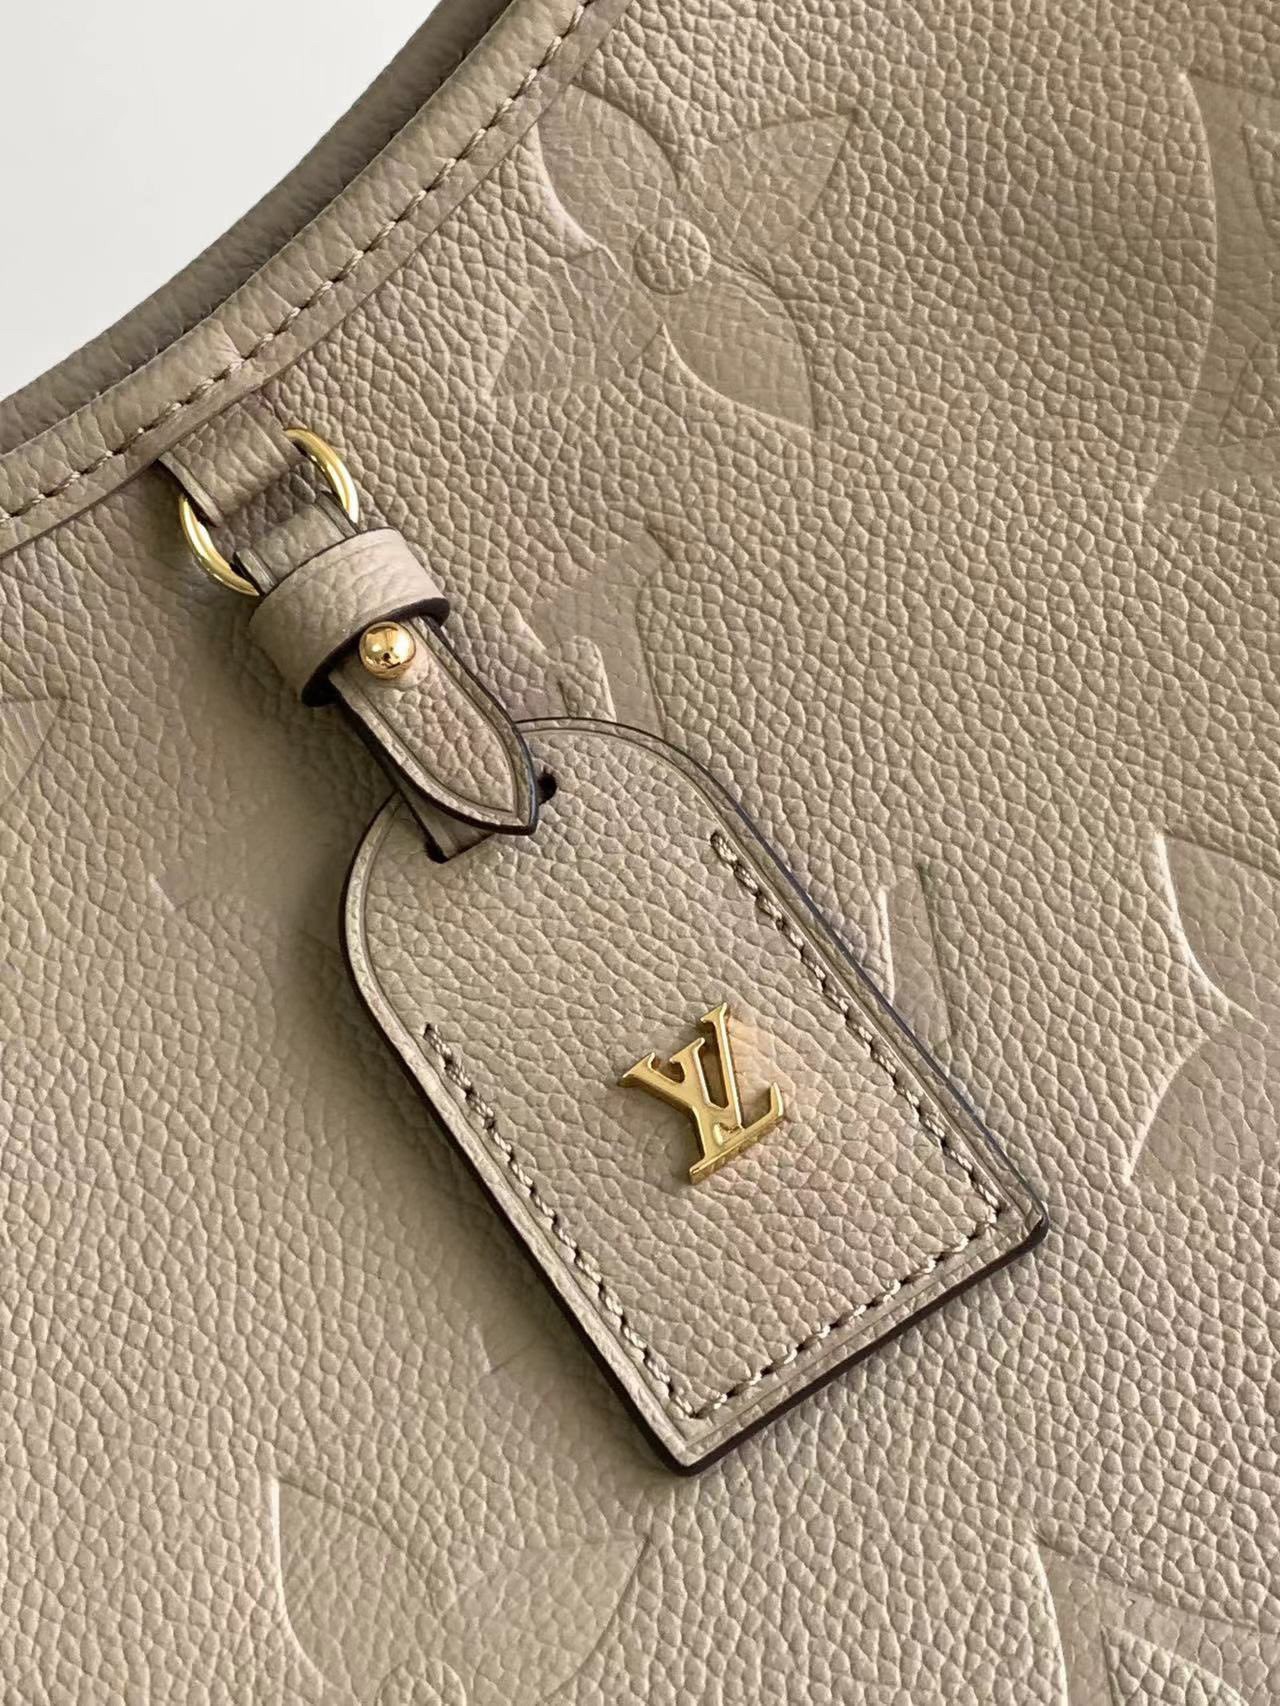 New Louis Vuitton CarryAll MM Empreinte Leather Unboxing and